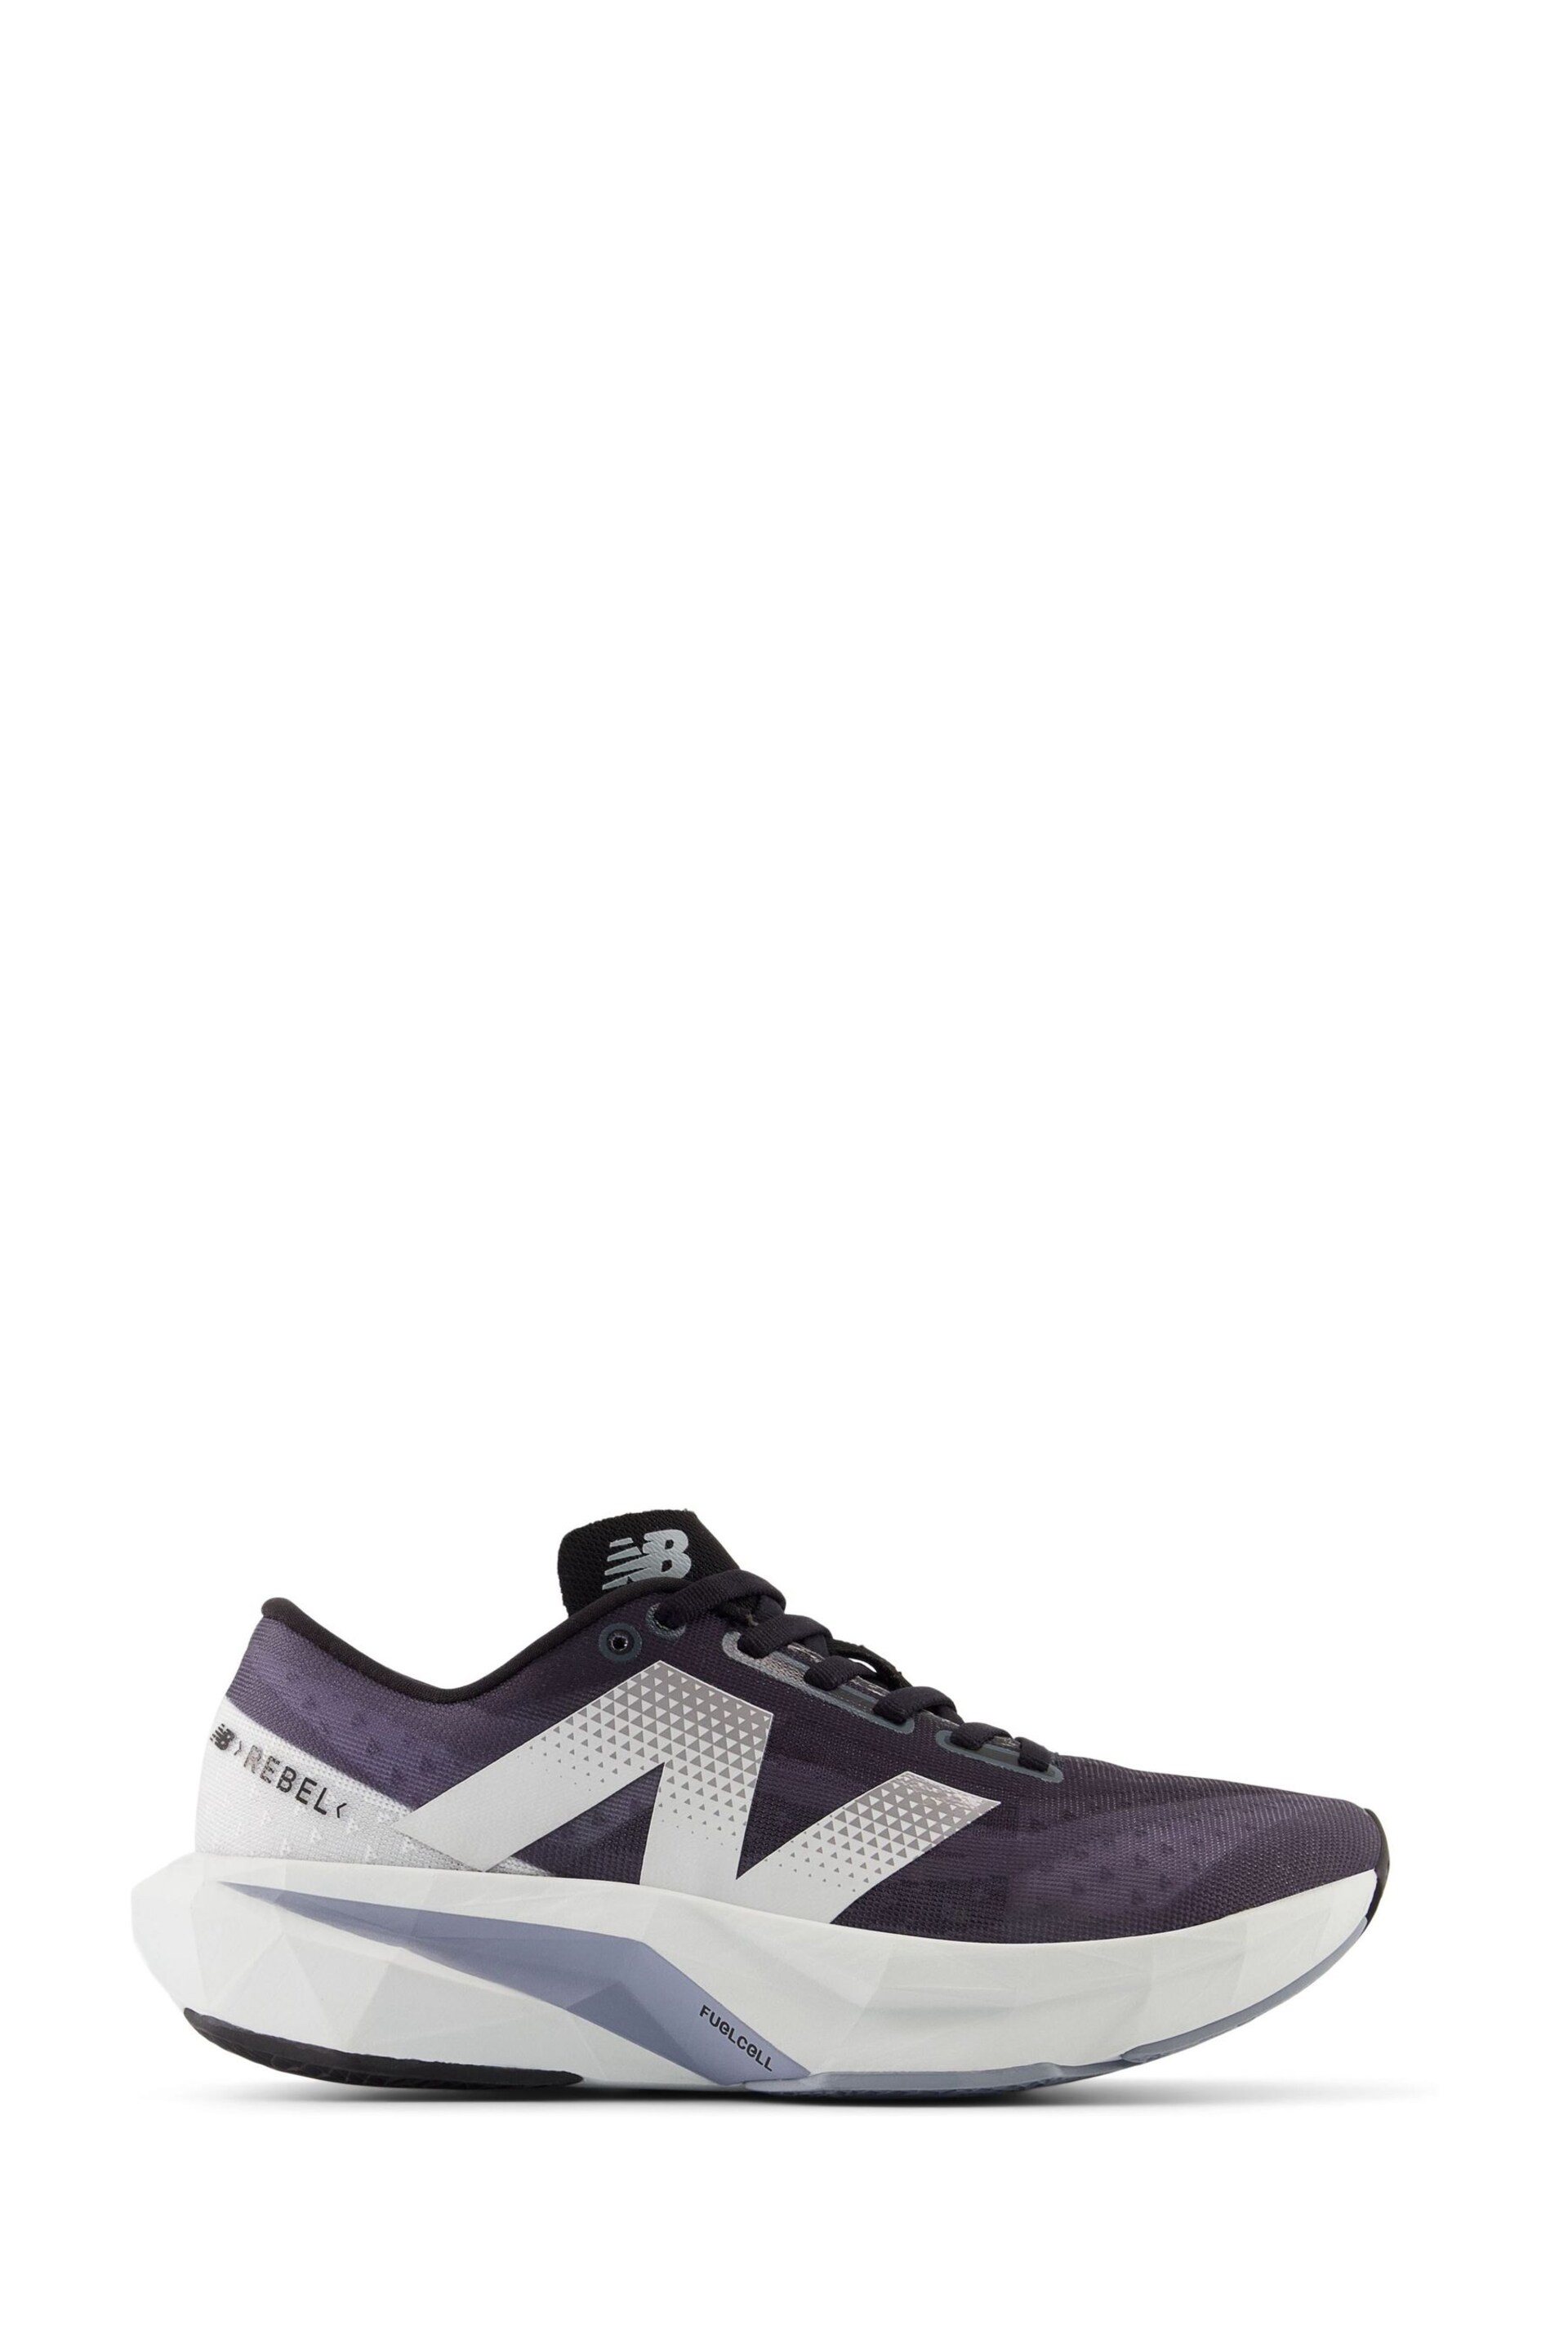 New Balance Grey Womens Fuelcell Rebel Trainers - Image 4 of 10